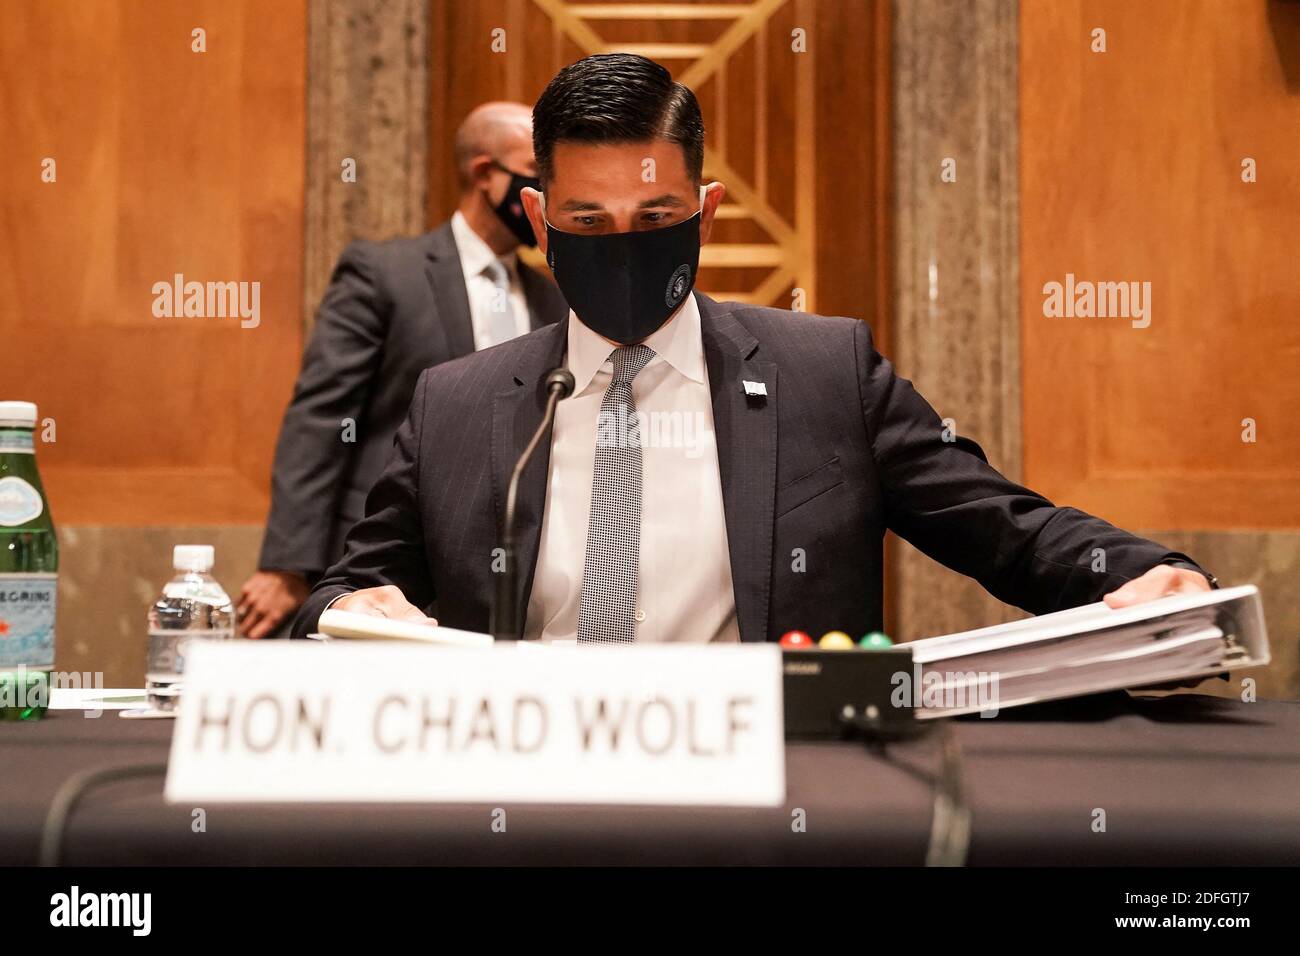 Department of Homeland Security acting Secretary Chad Wolf arrives for his Senate Homeland Security and Governmental Affairs Committee confirmation hearing on Wednesday, September 23, 2020. Photo by Greg Nash/Pool/ABACAPRESS.COM Stock Photo